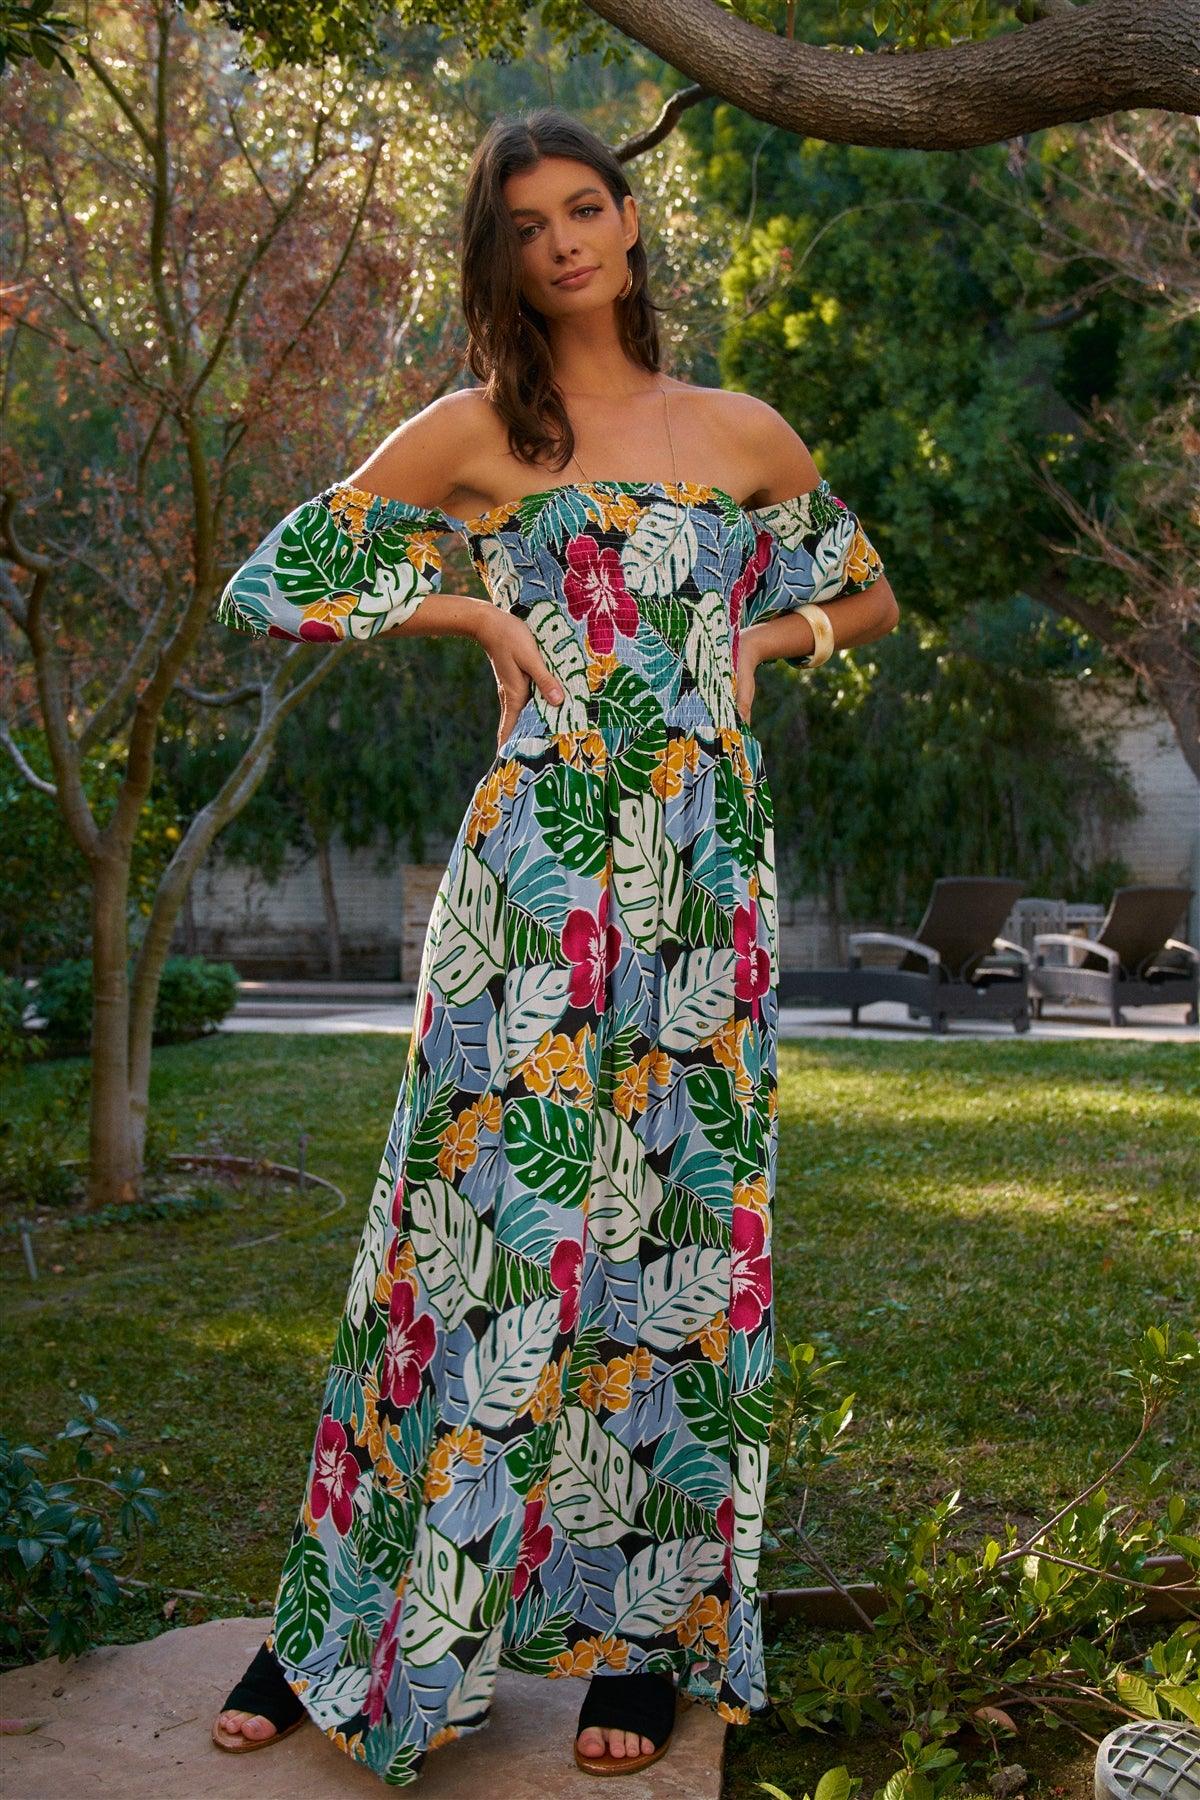 Green&Yellow Floral Print Off-The-Shoulder Puff Sleeve Smock Lace-Up Detail Summer Maxi Dress /2-2-2